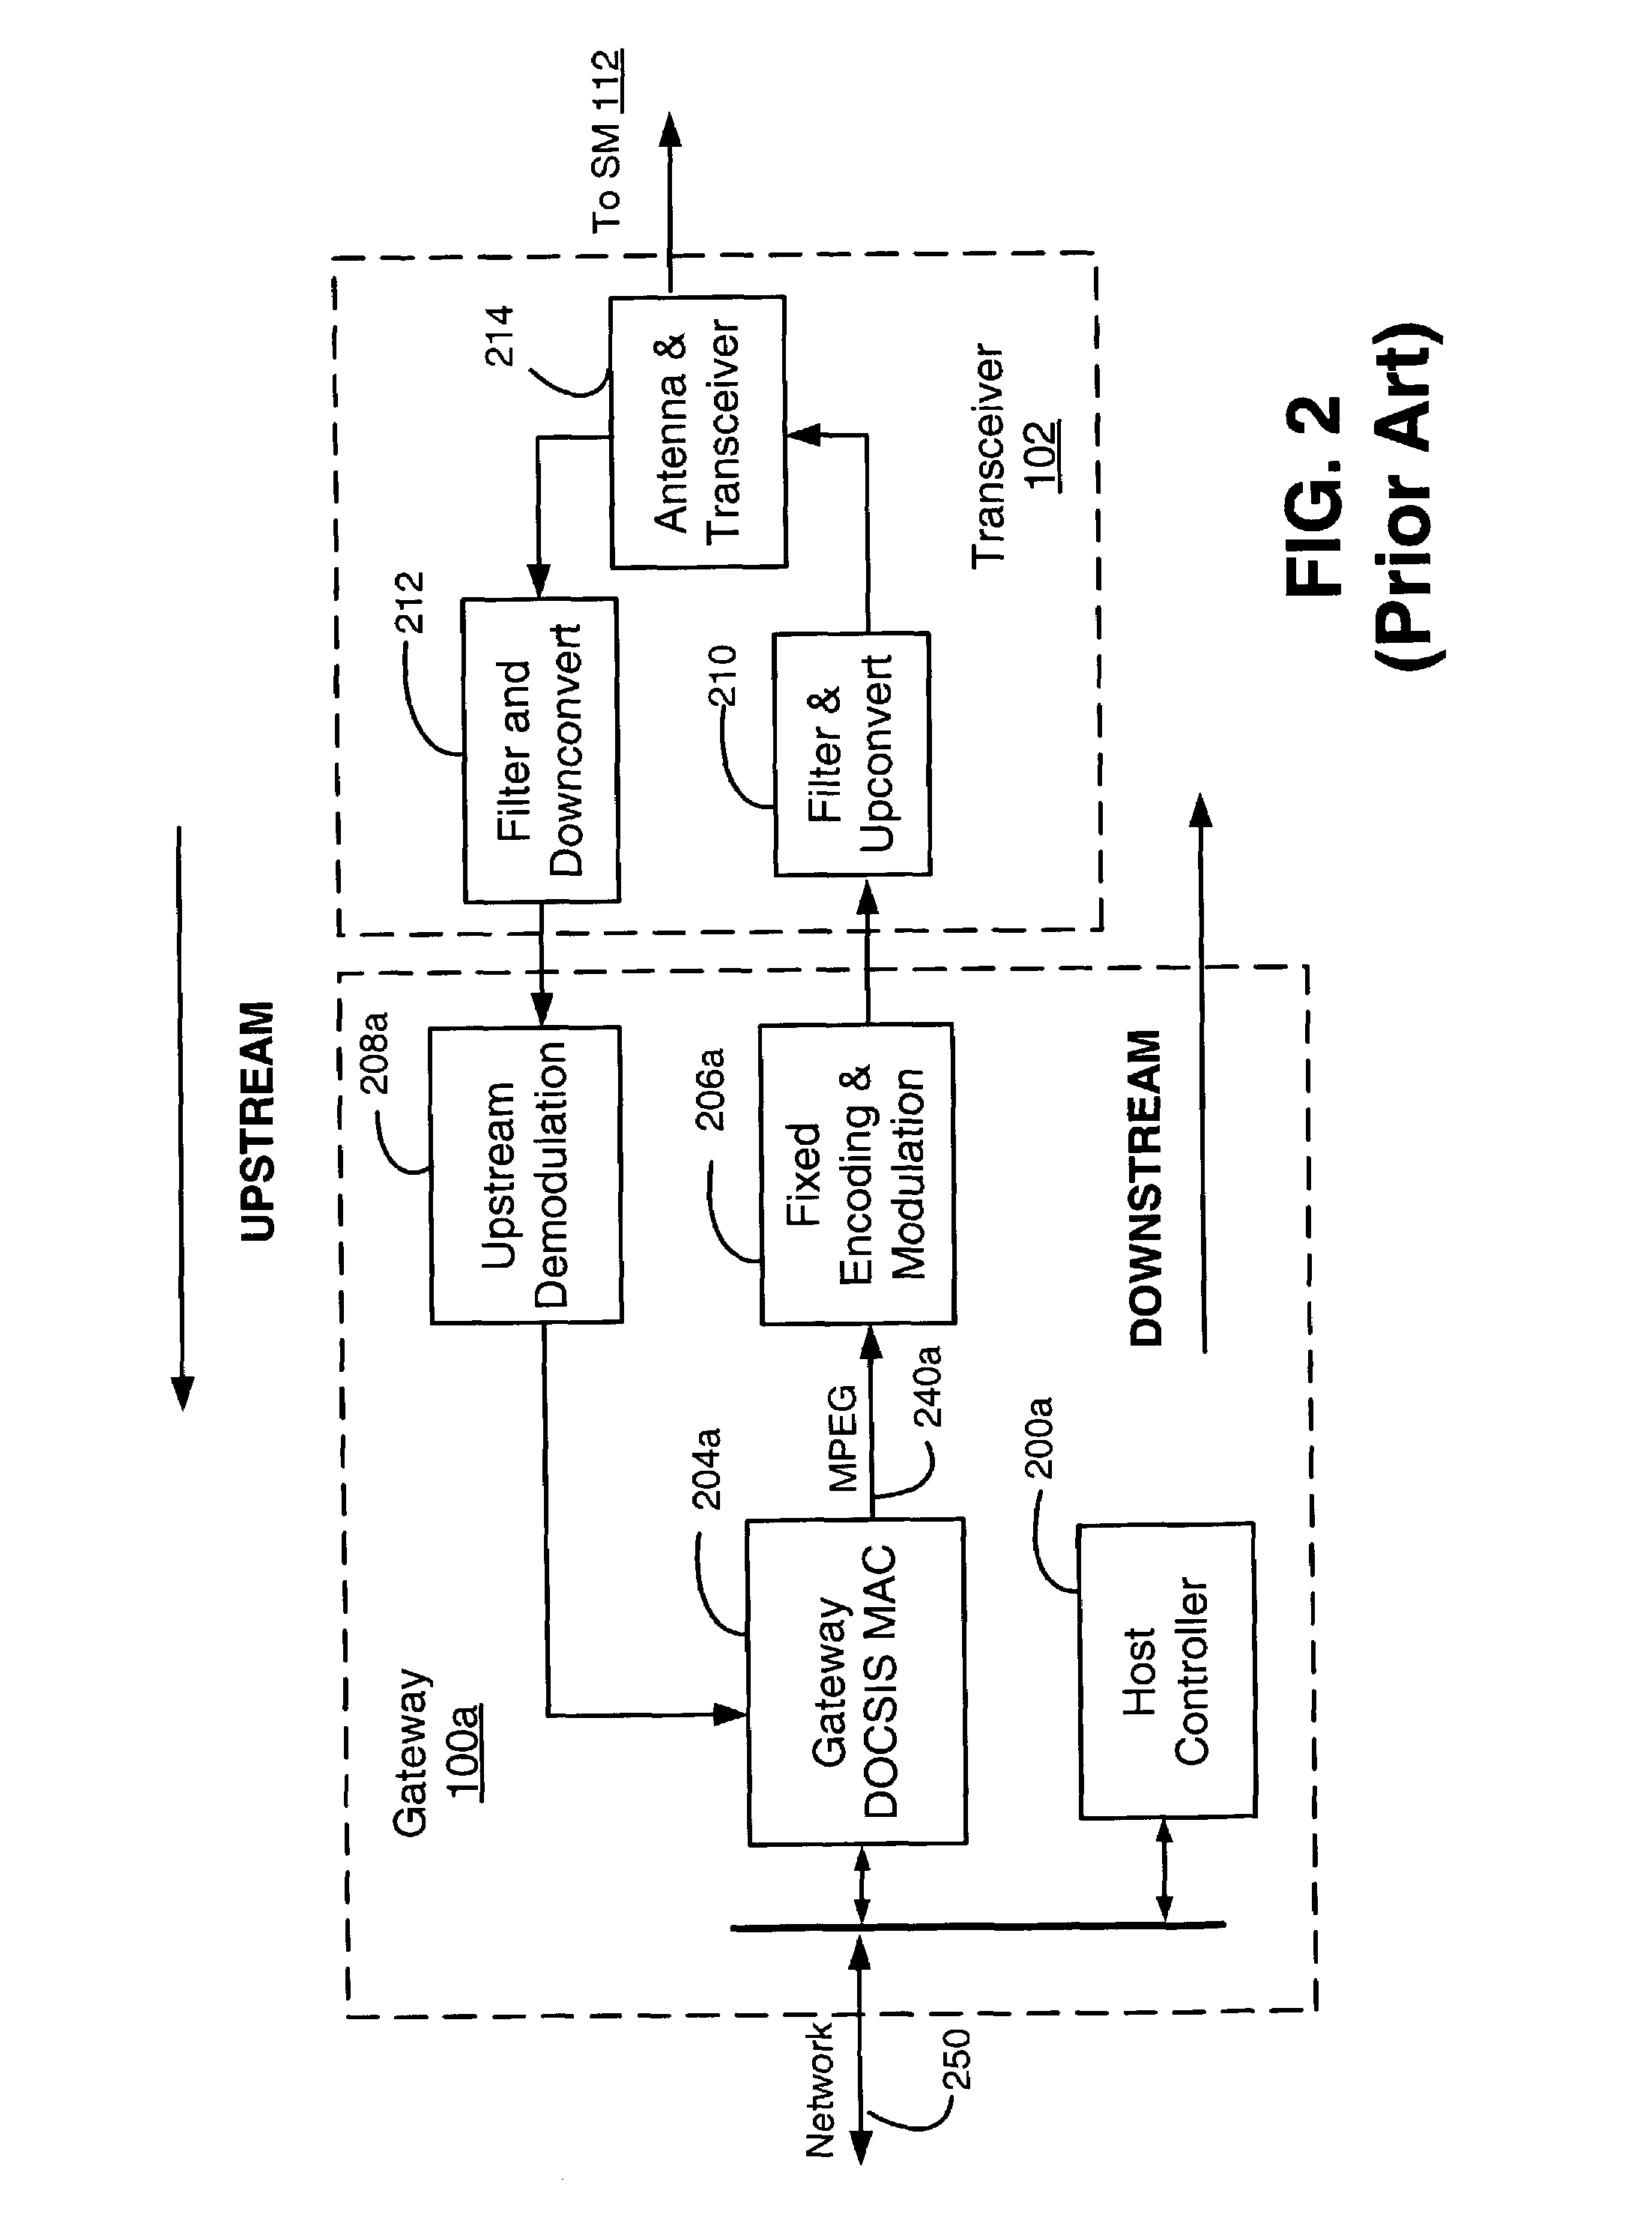 Downstream time domain based adaptive modulation for DOCSIS based applications